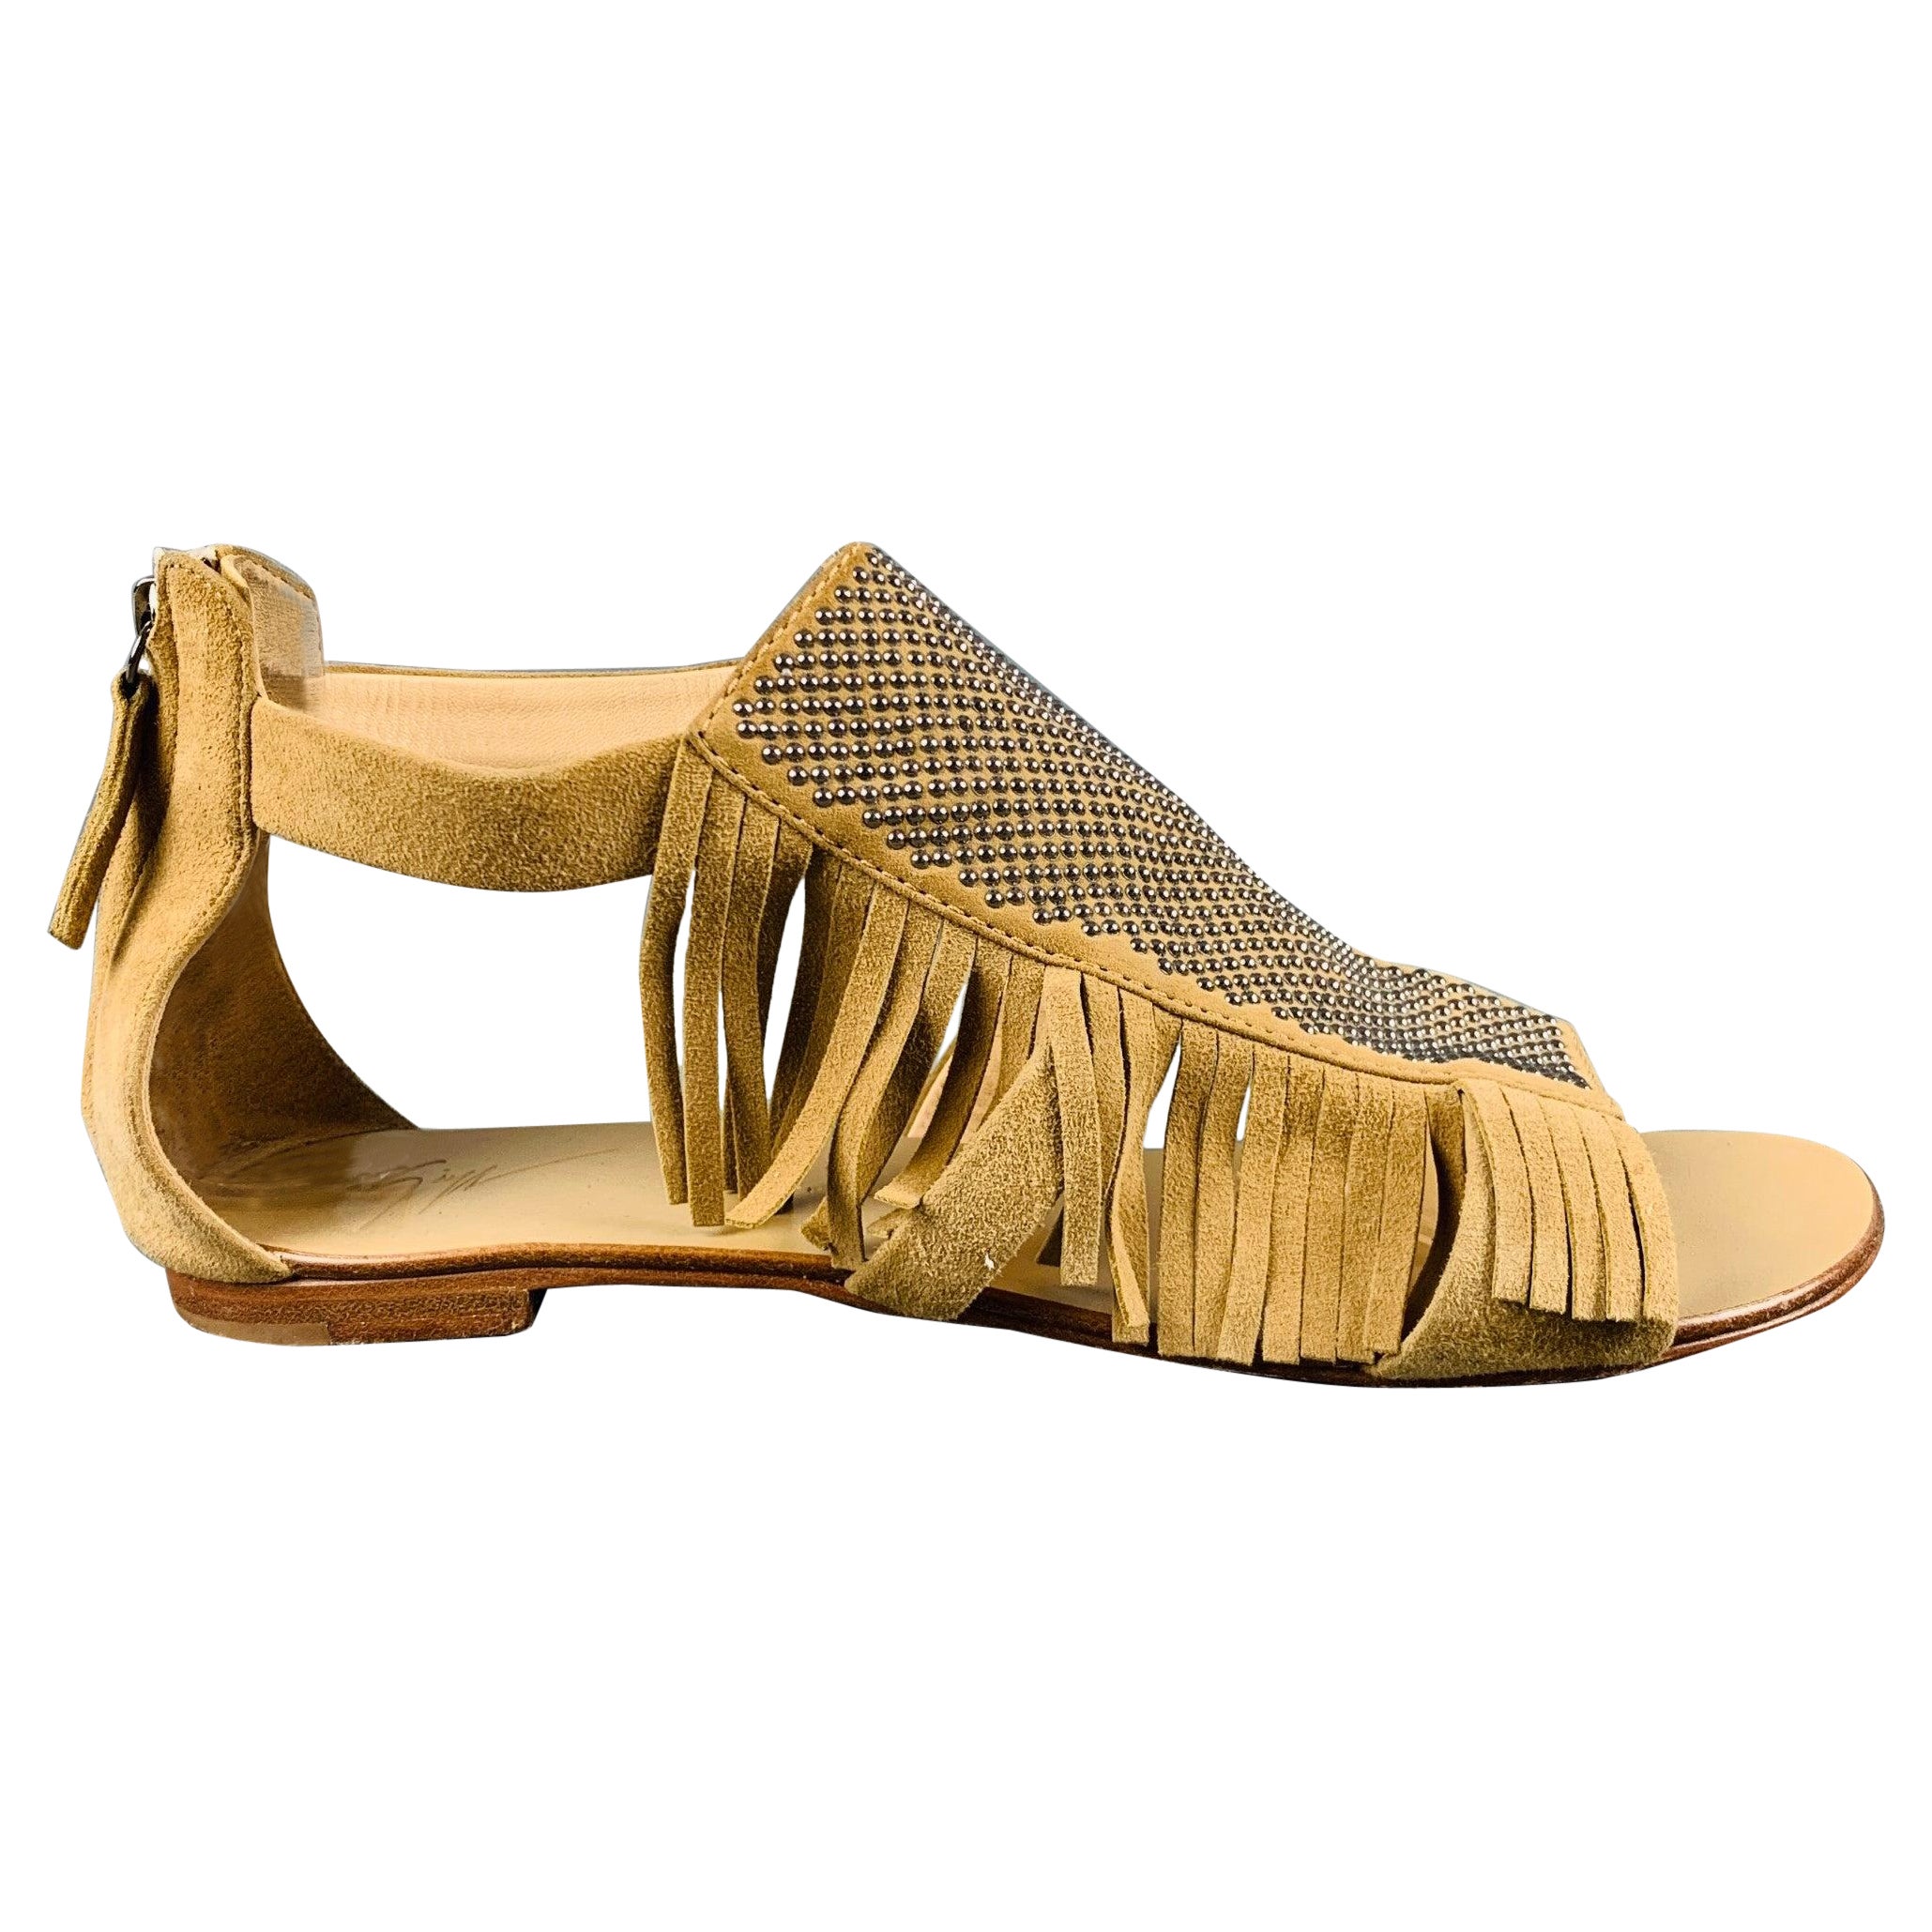 GIUSEPPE ZANOTTI Size 10 Beige Suede Studded Fringed Sandals For Sale